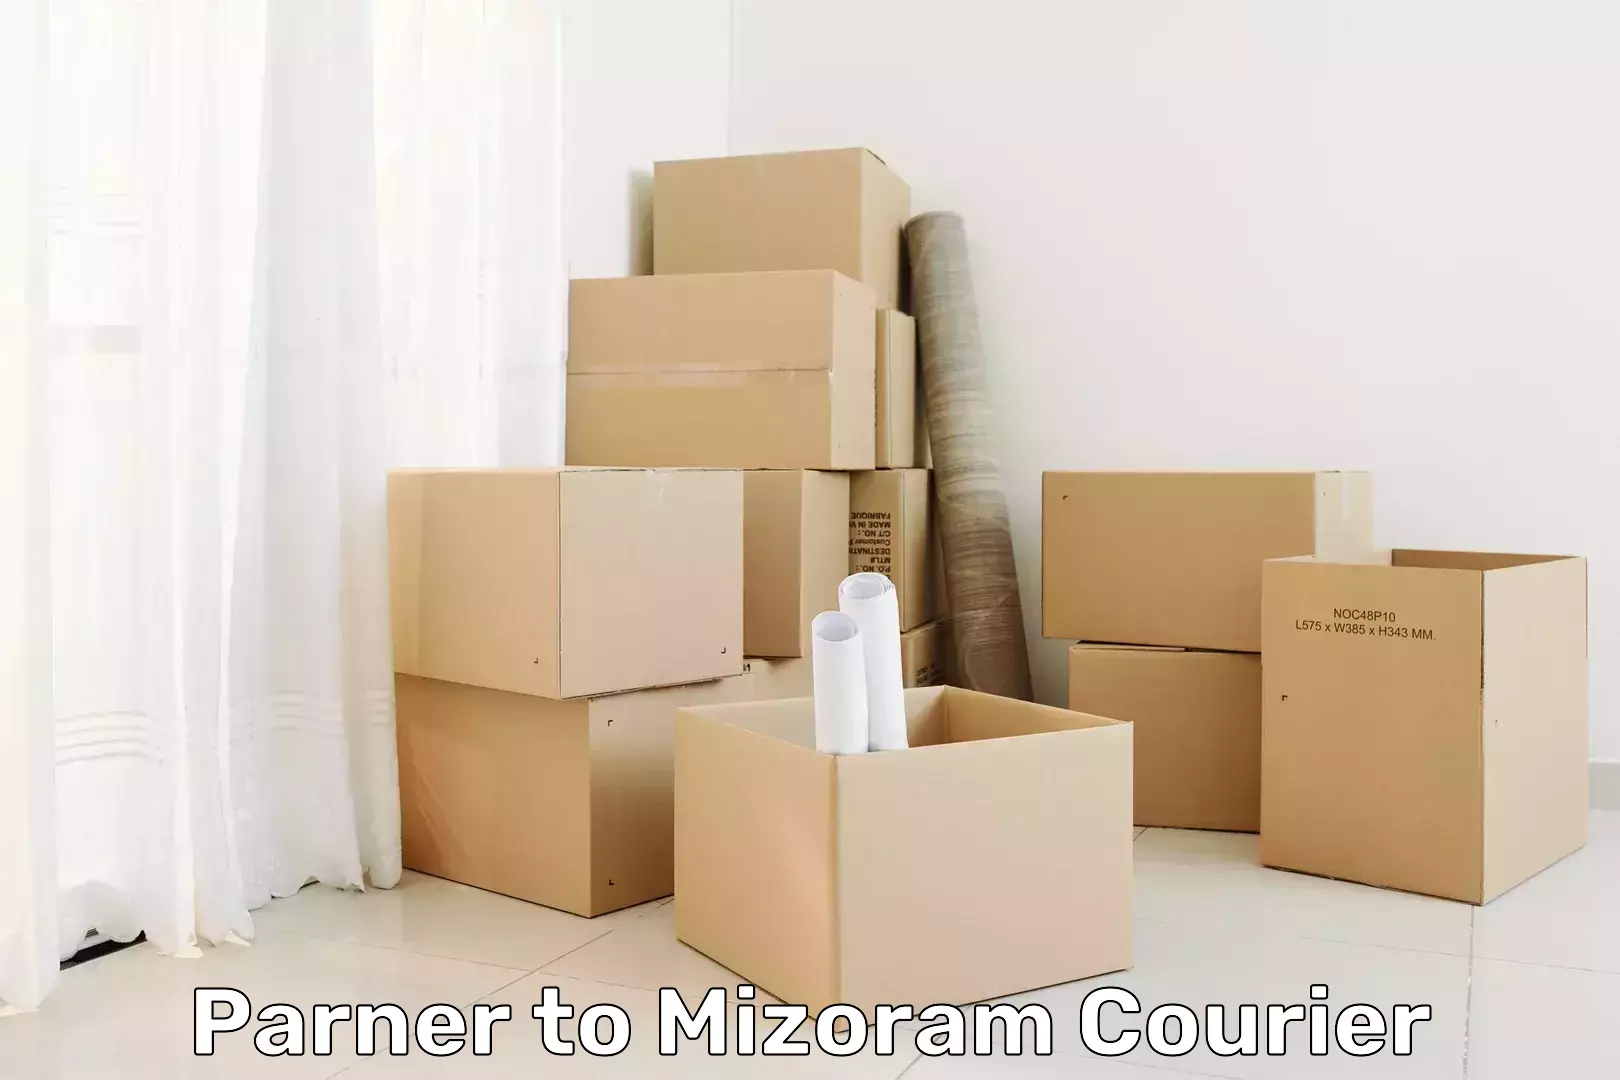 Multi-national courier services Parner to Mizoram